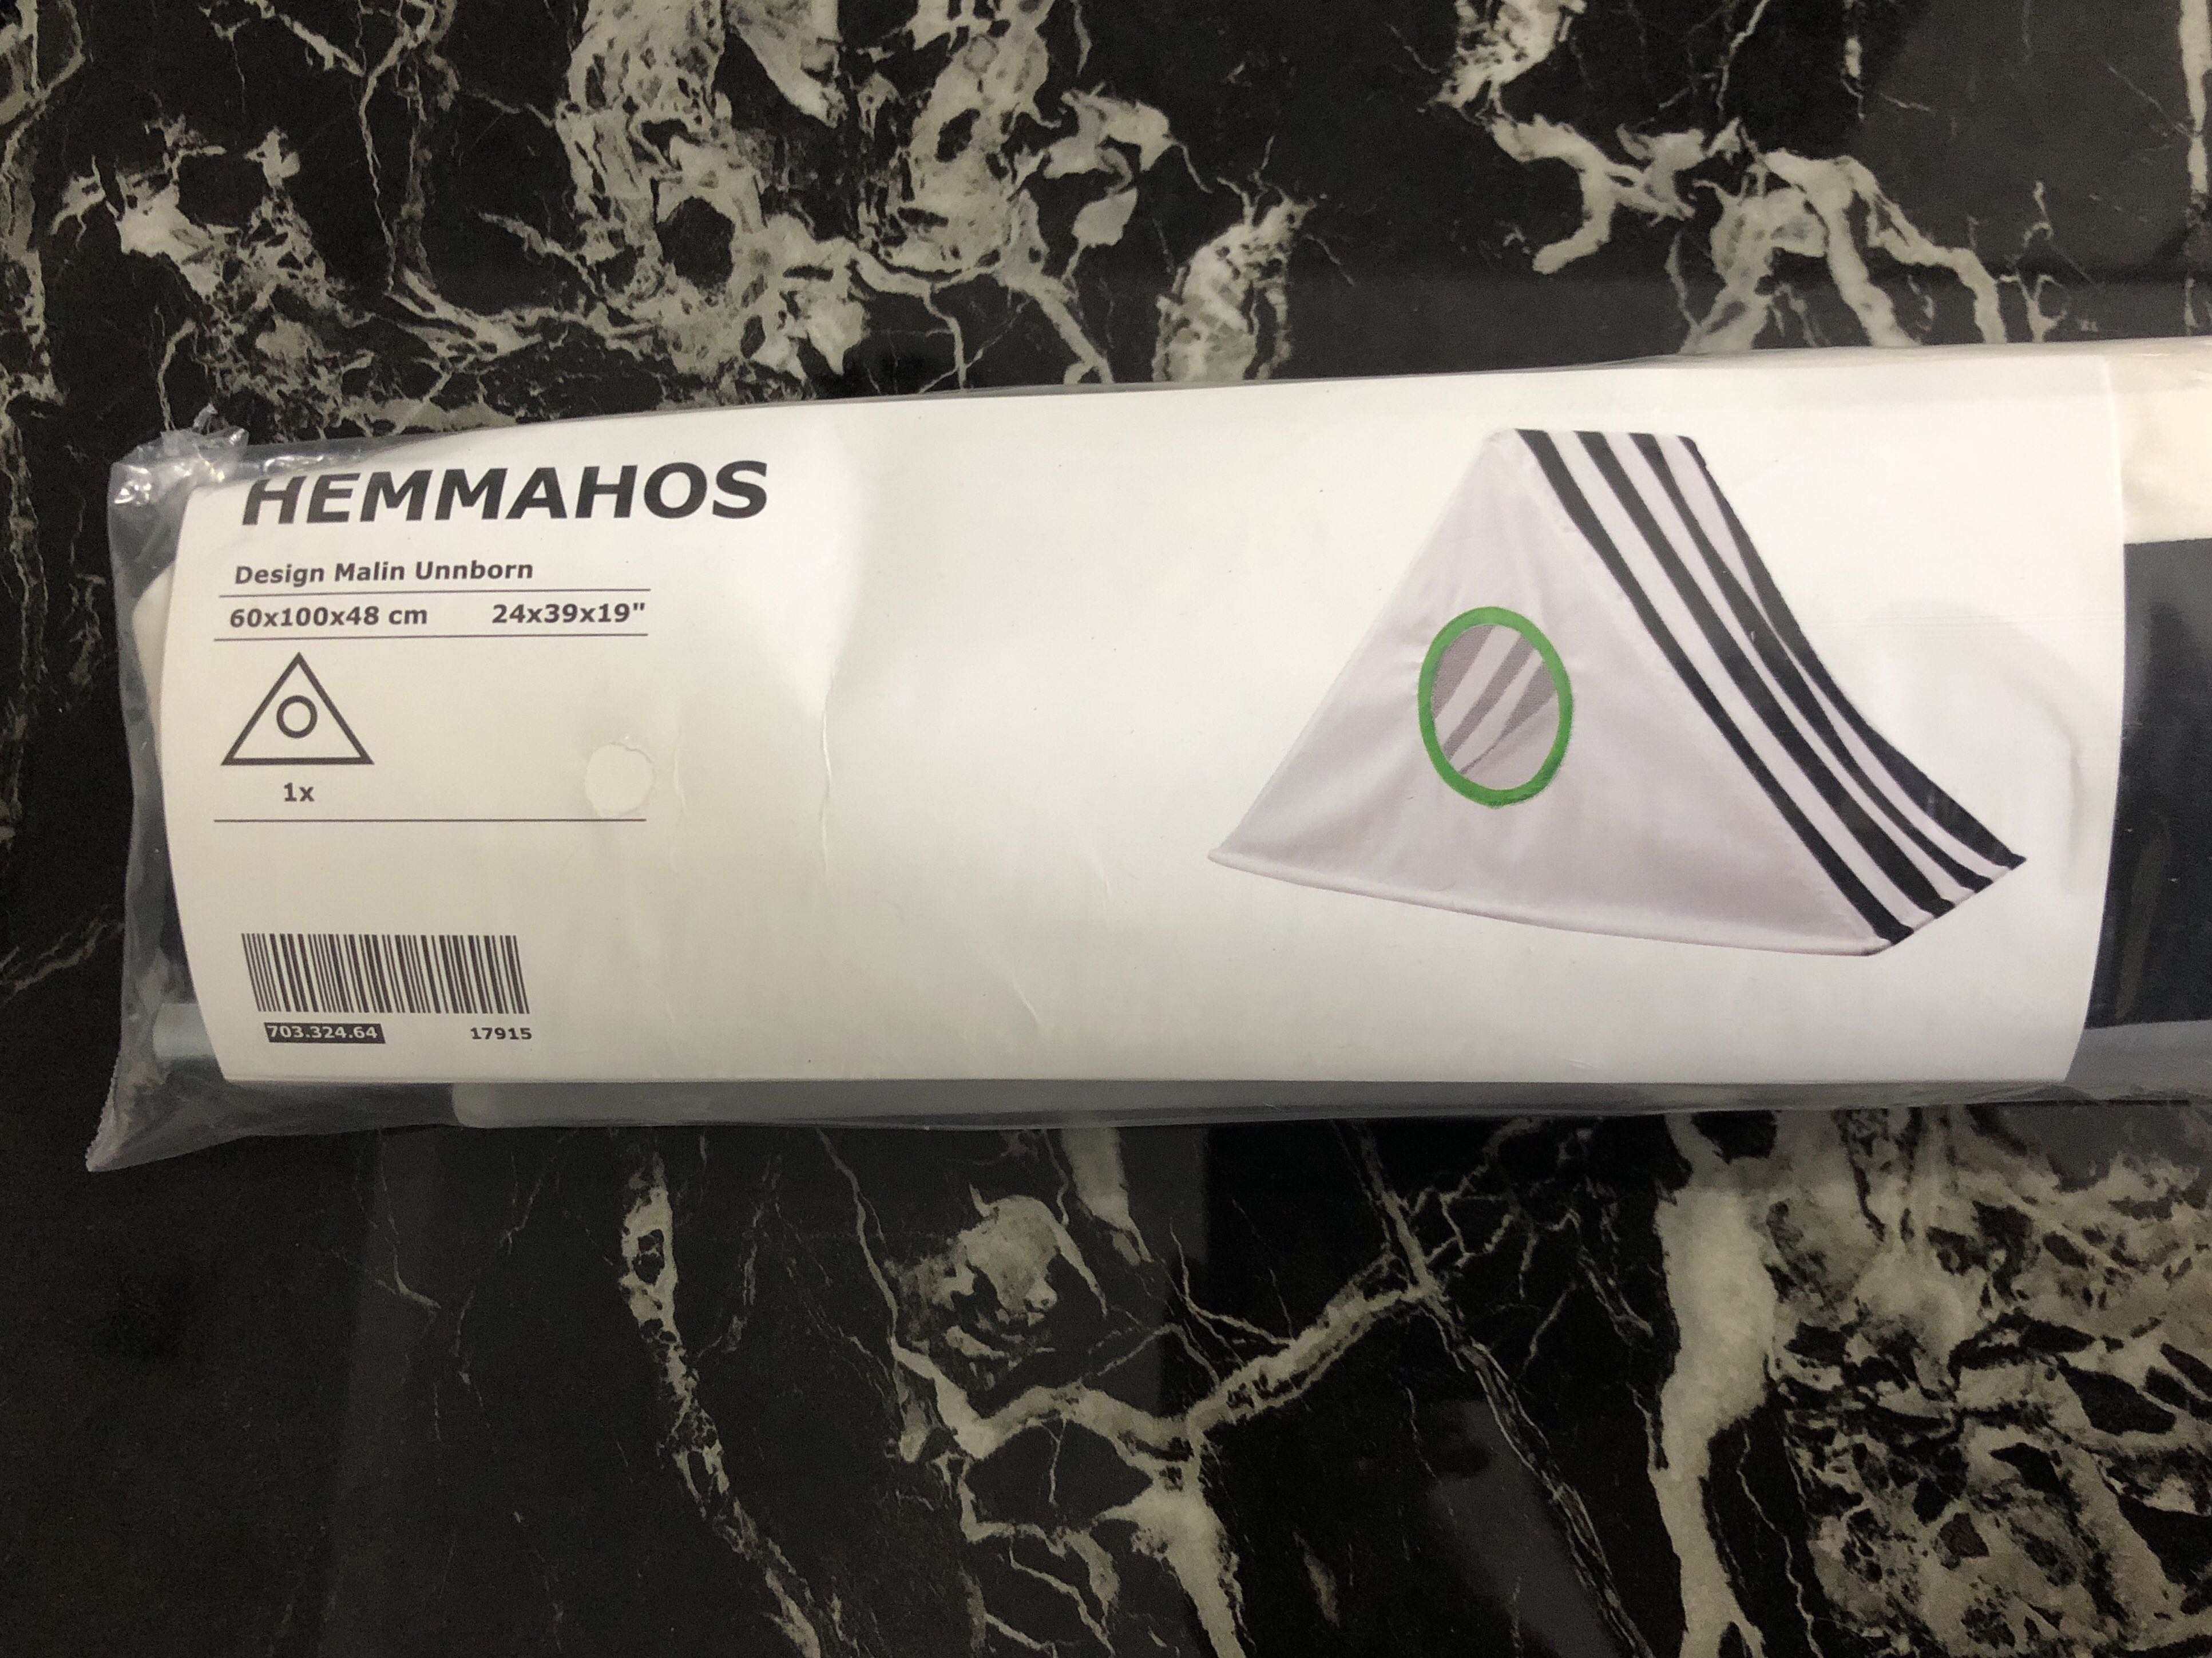 Ikea Hemmahos Bed Canopy, black/ white, Bed Tentage For Kids / Pets ...